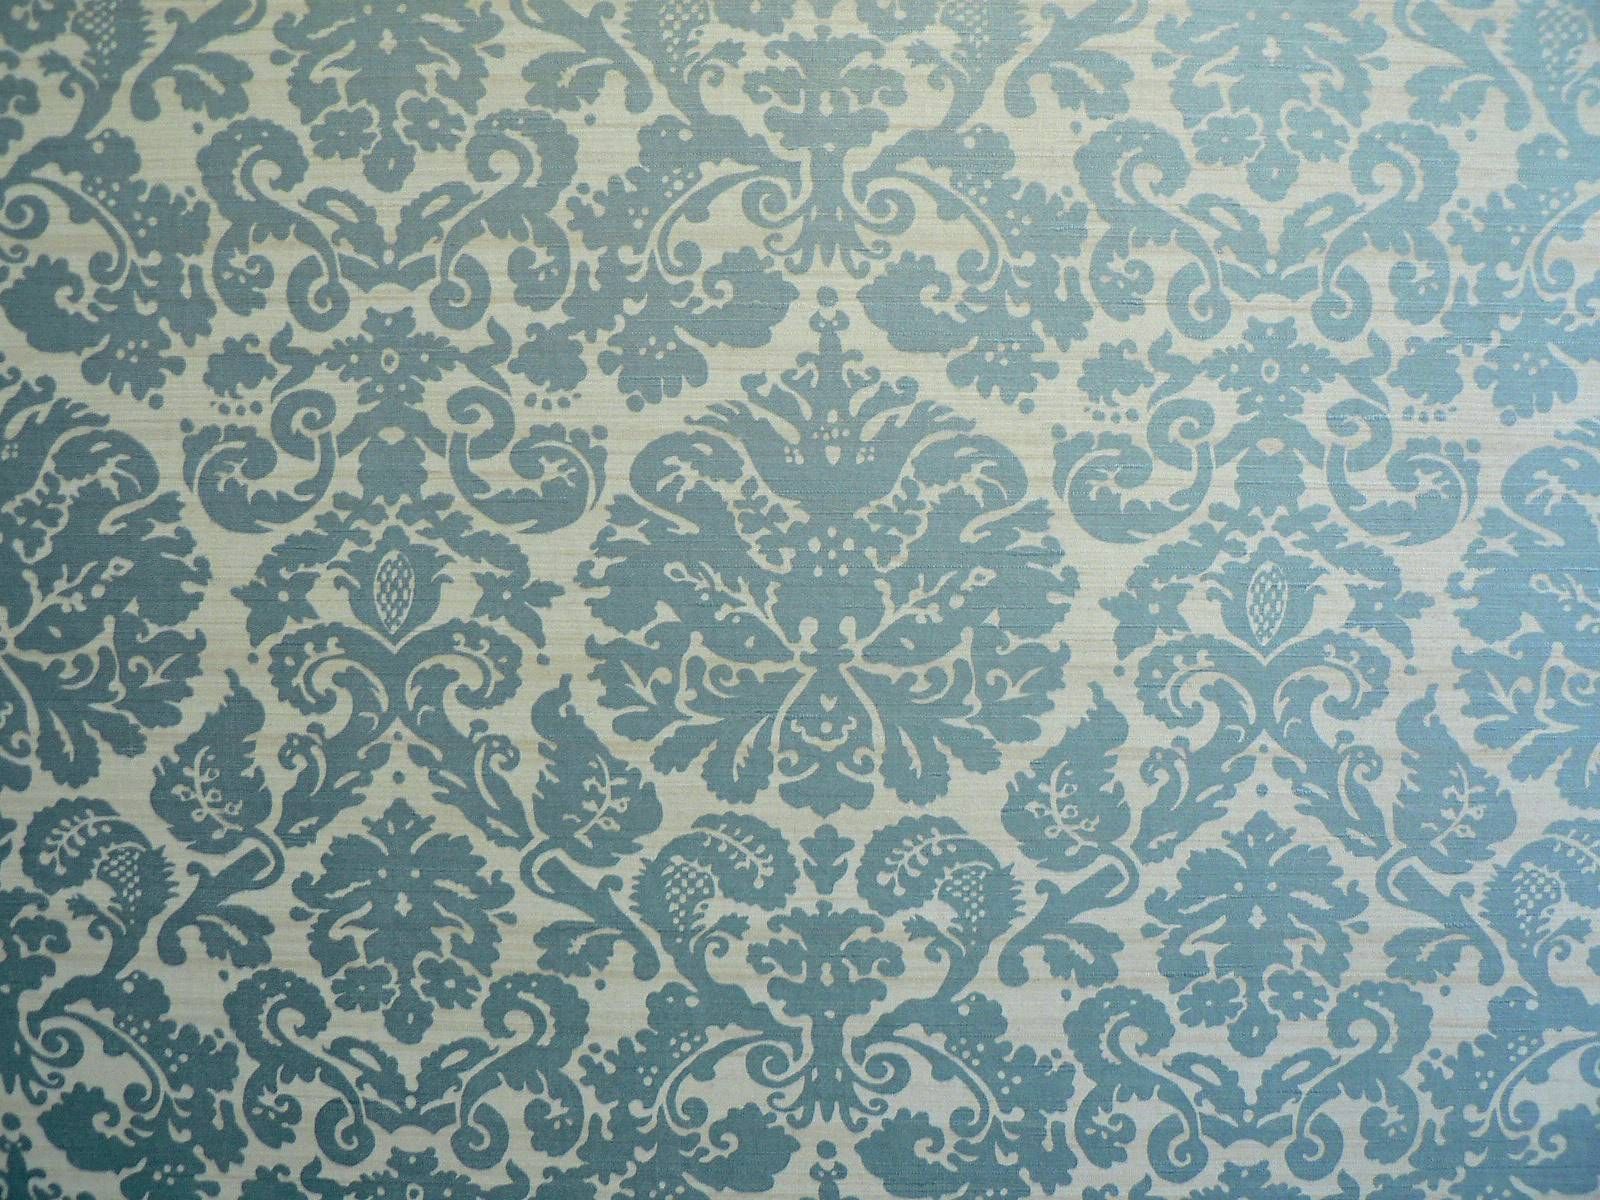 FREE Vintage Background in PSD .freecreatives.com